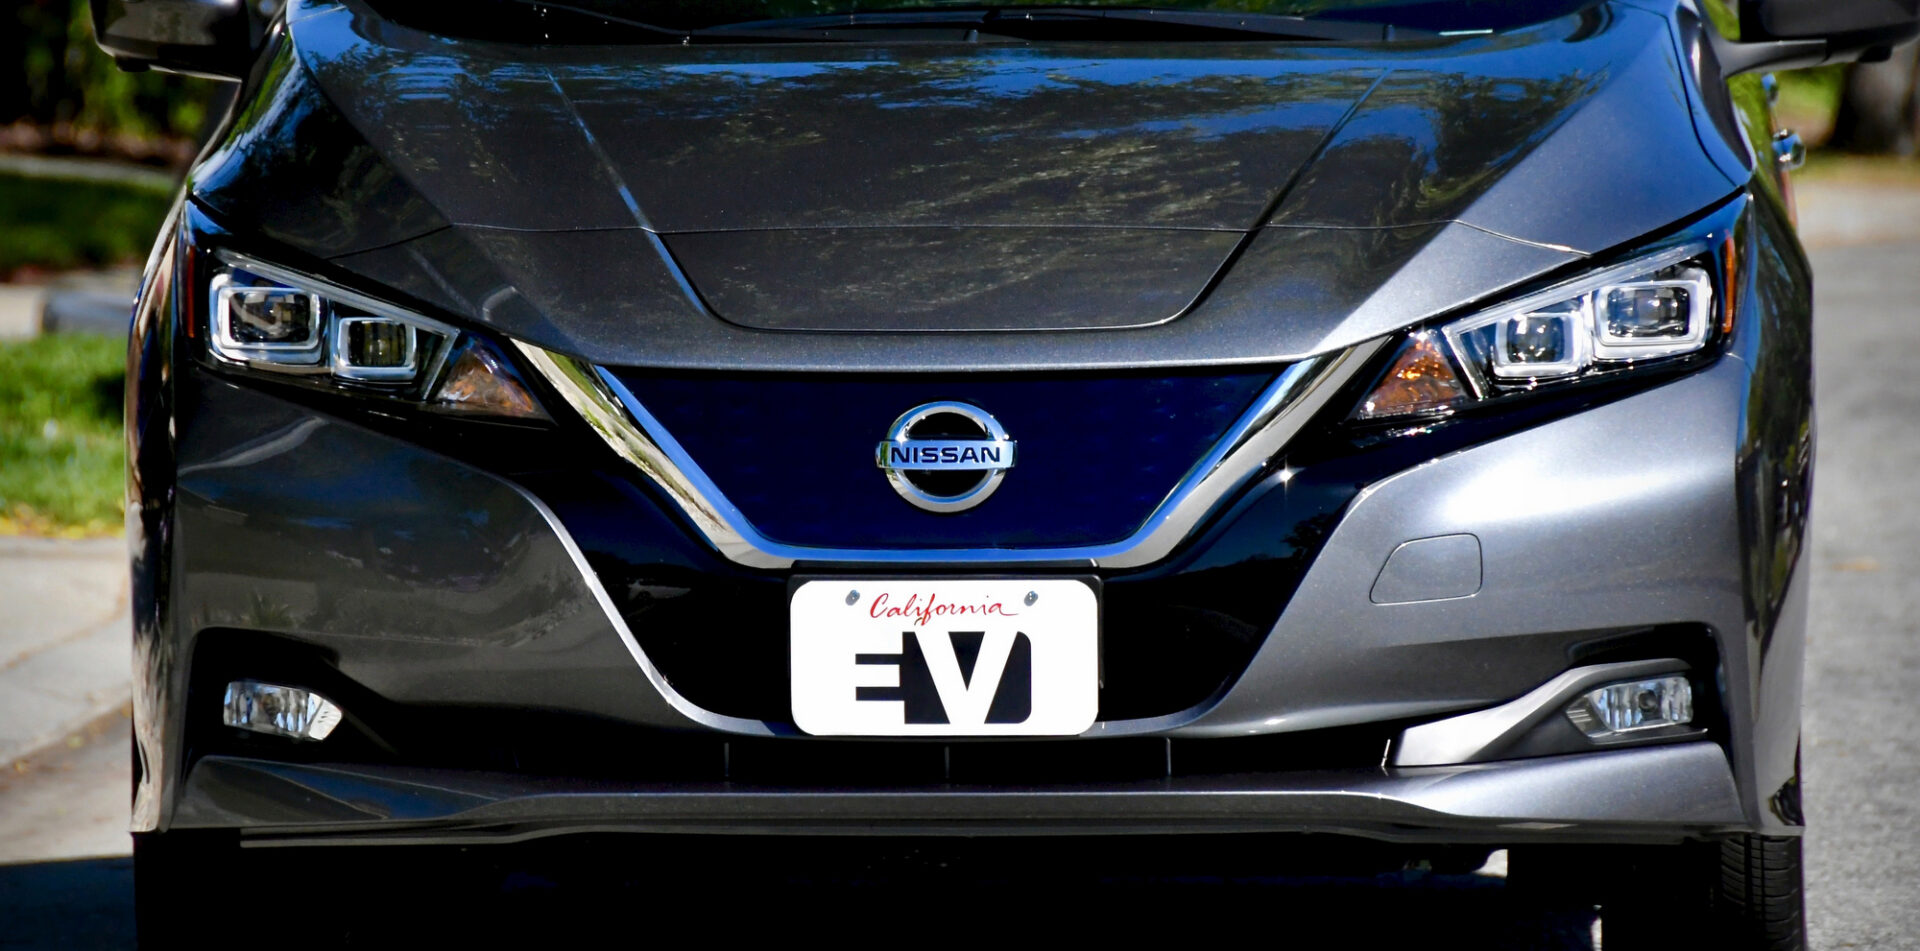 News New Service Aims To Help Ev Buyers Clean Fleet Report